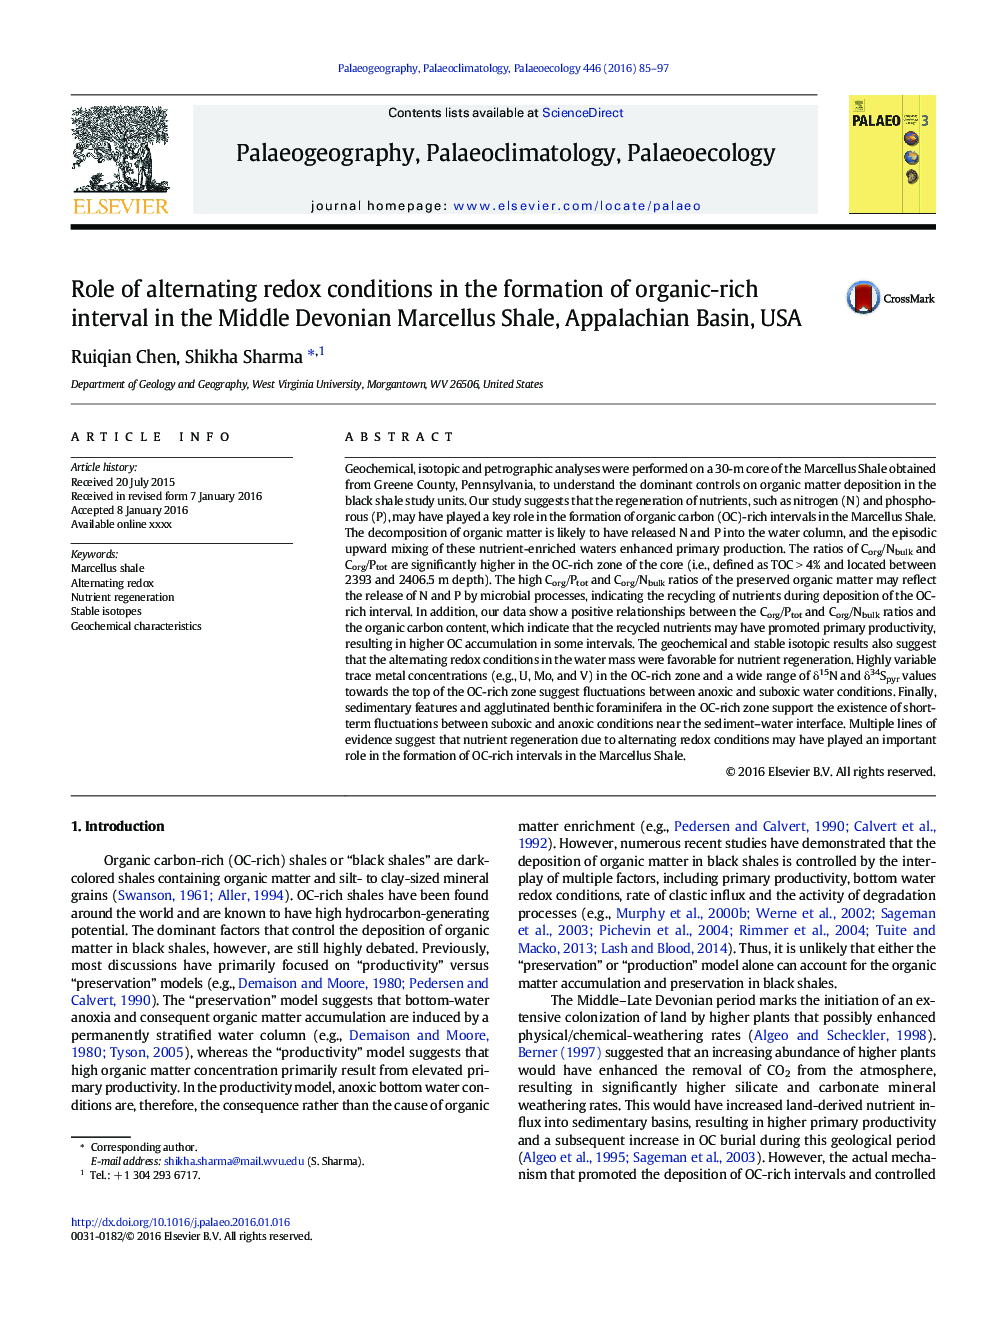 Role of alternating redox conditions in the formation of organic-rich interval in the Middle Devonian Marcellus Shale, Appalachian Basin, USA